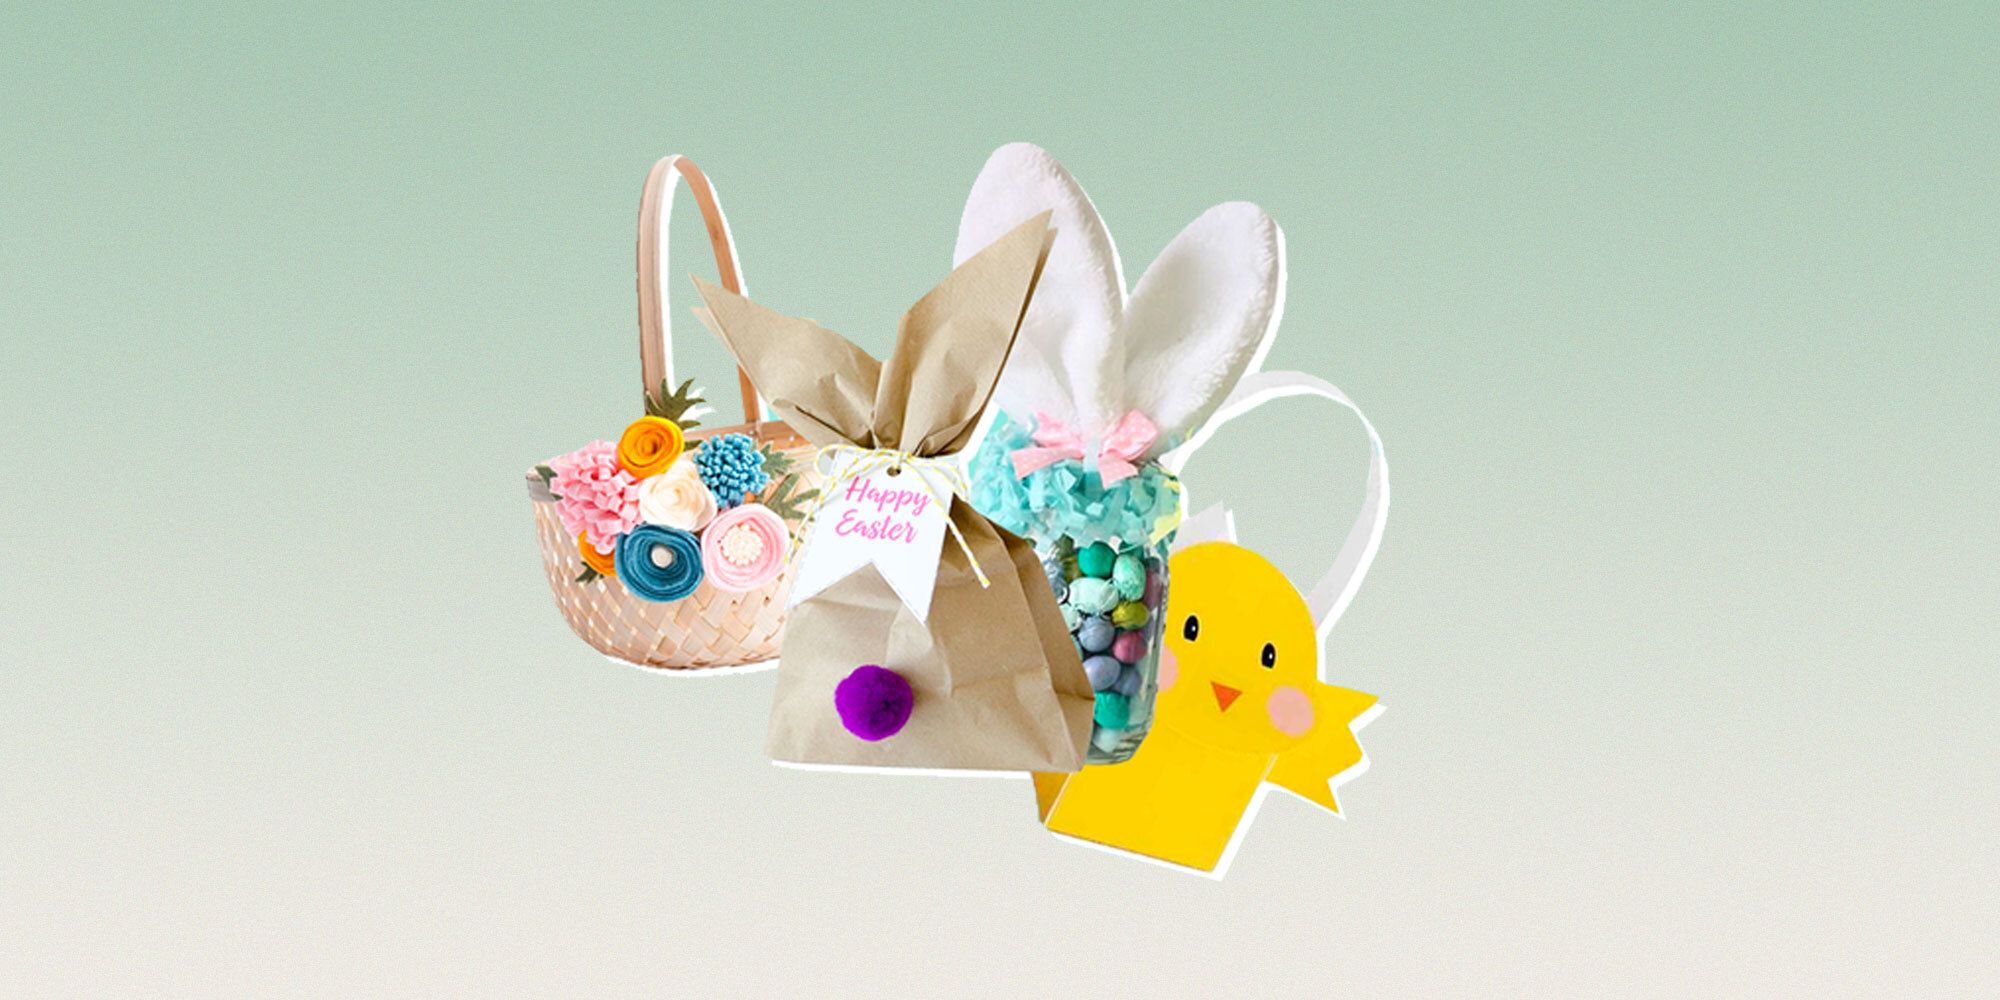 Miniature Gift Bag with Easter Basket Full of Chicks green tissue 